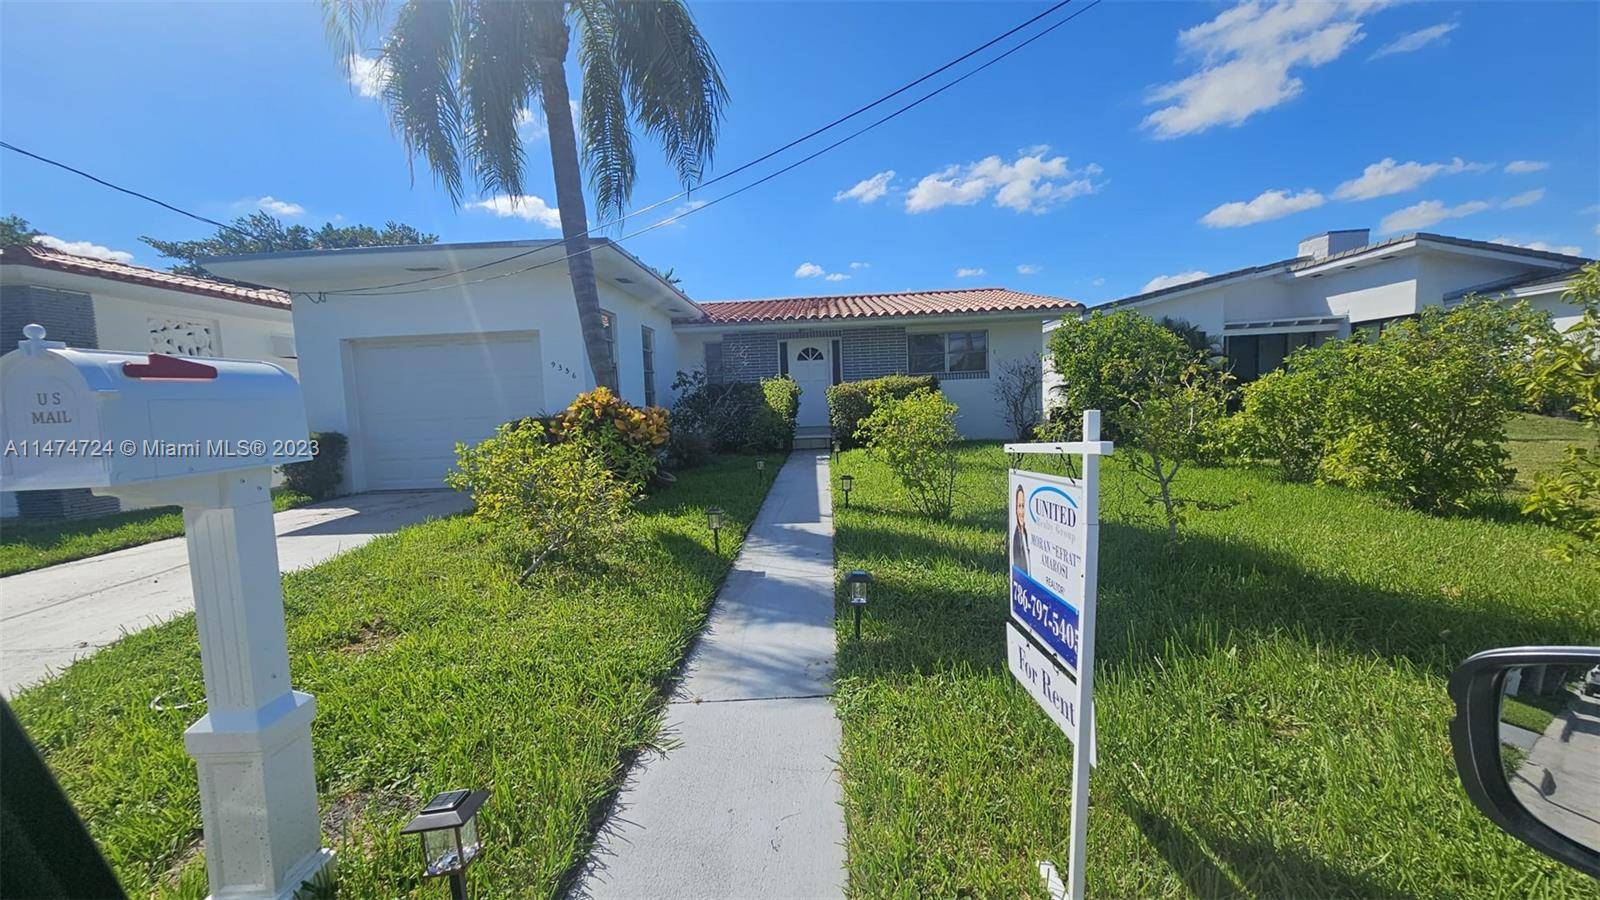 Charming 3 bdr 2 bth single story home in one of the most prestigious Beach Front neighborhoods in Miami.